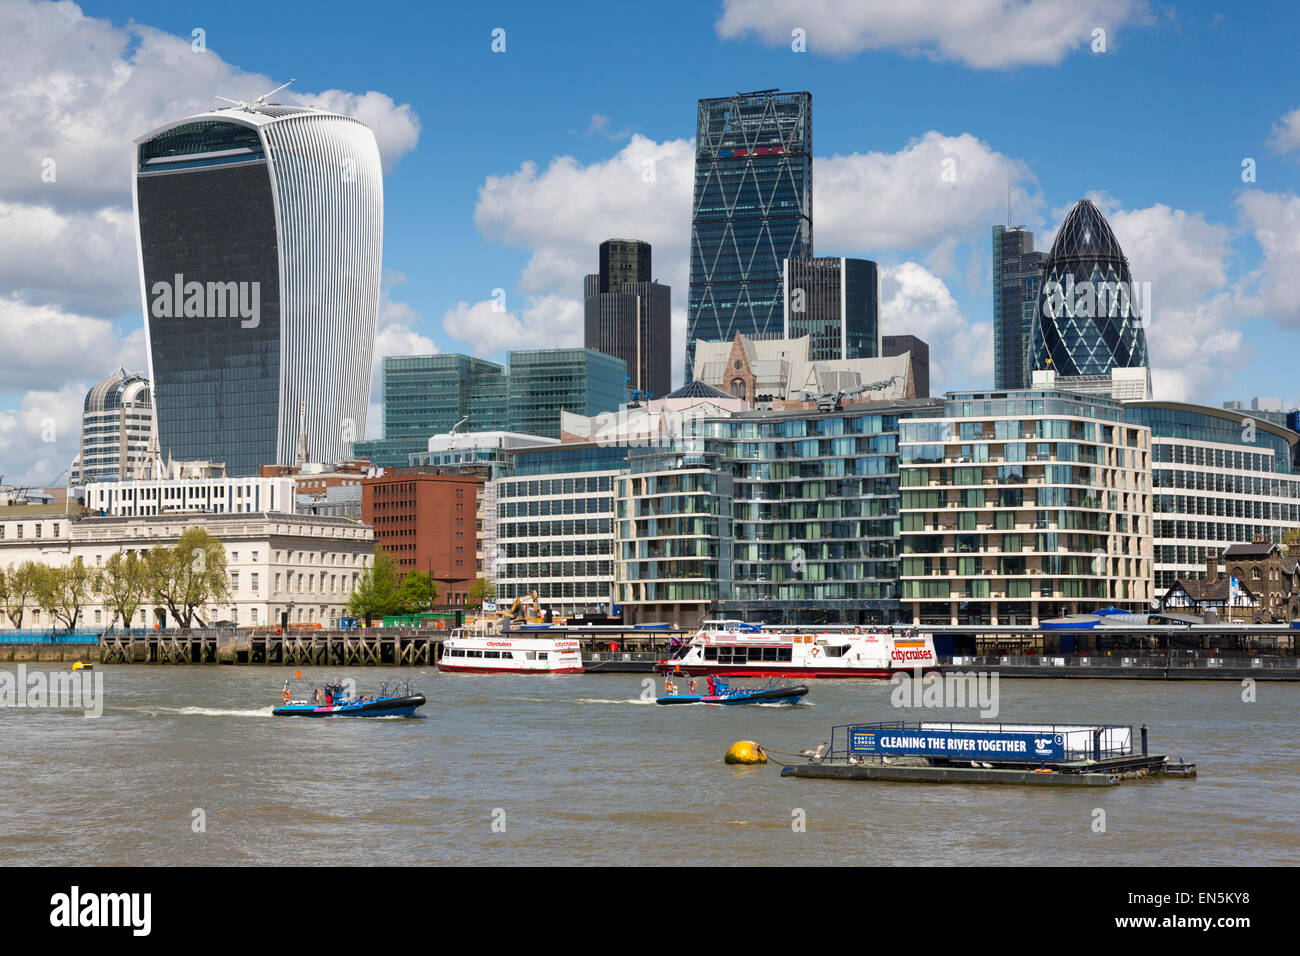 City of London skyline with the Walkie Talkie, Tower 42, Cheesegrater ...